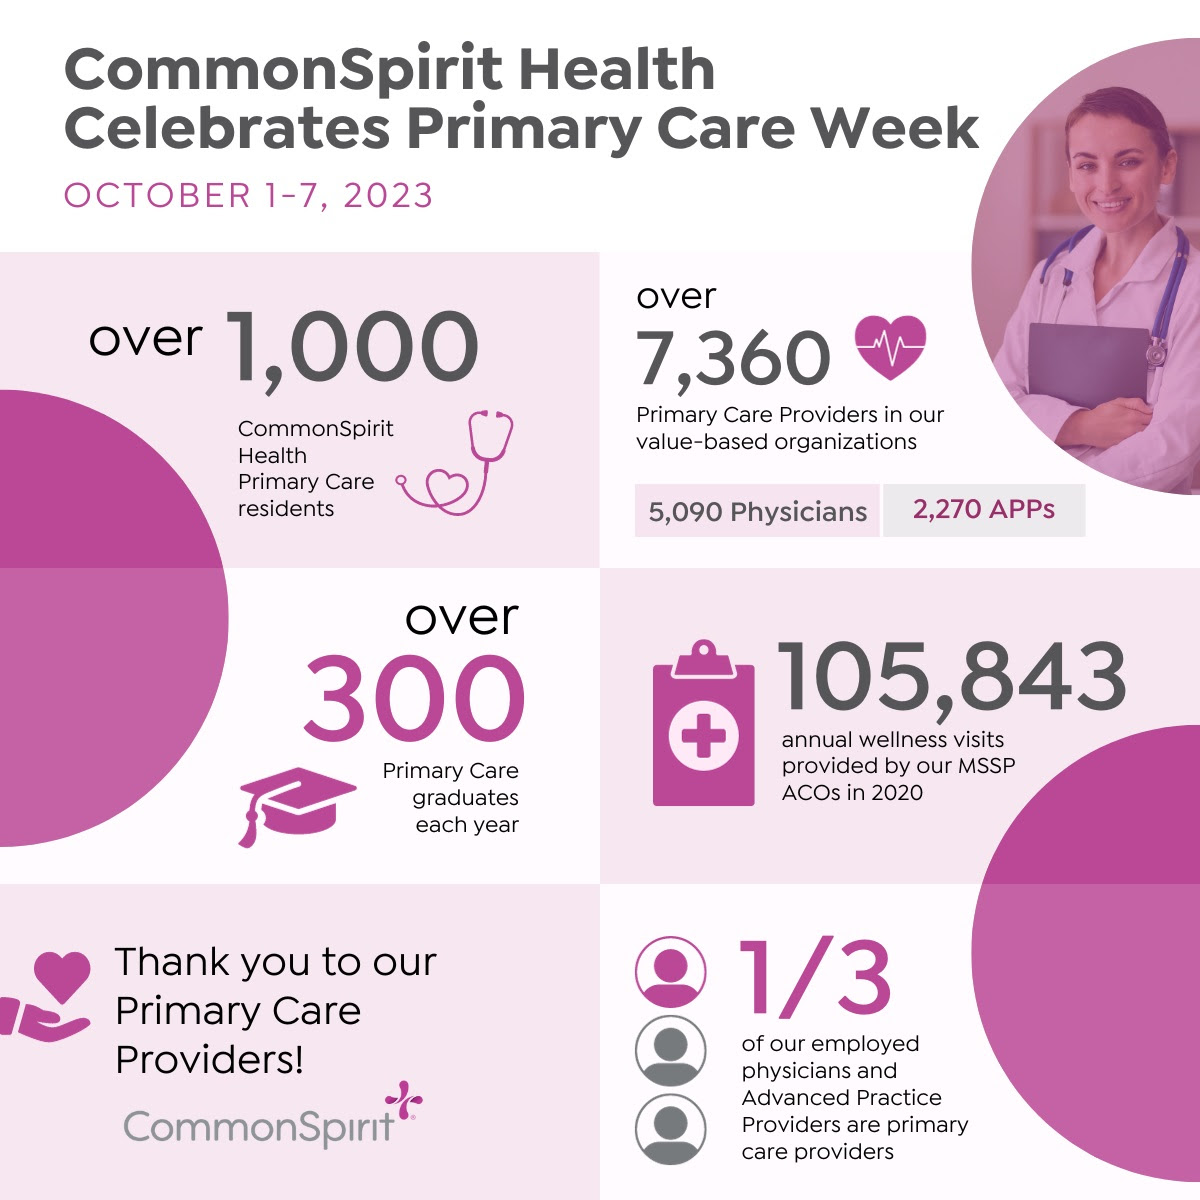 Primary Care Week recognizes the important contribution of Primary Care Physicians and APPs everywhere.